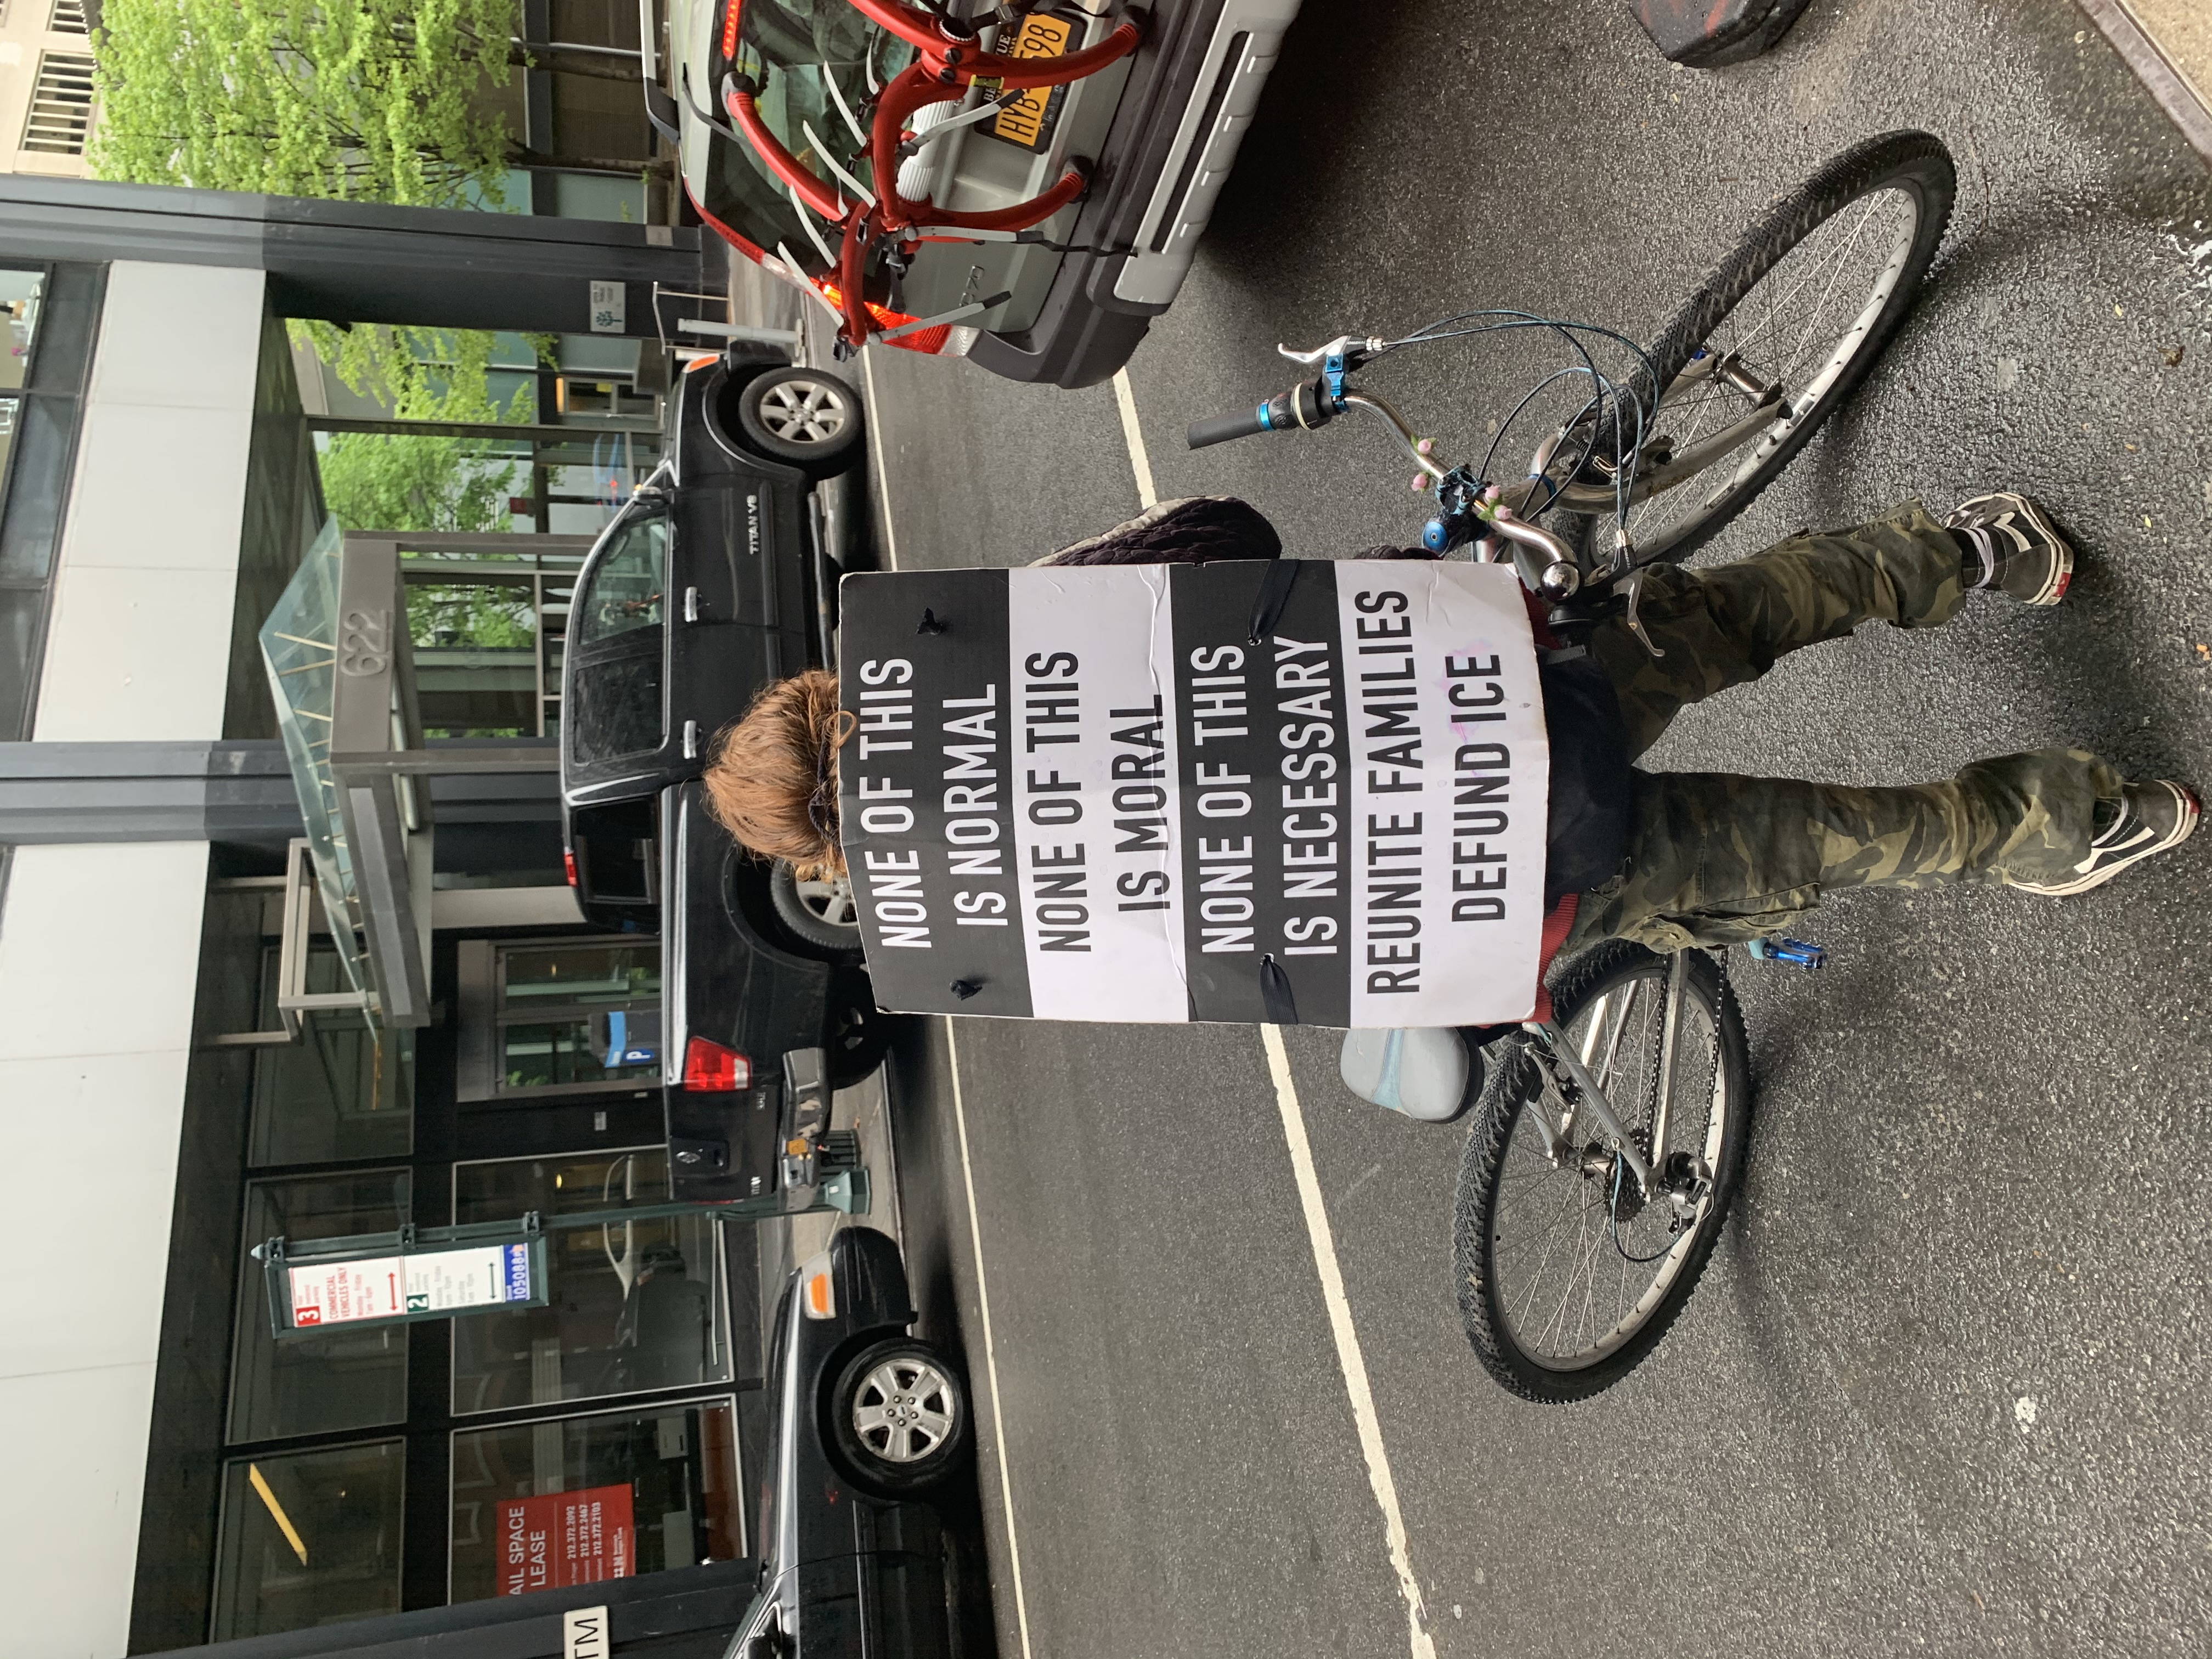 A person stands in a NYC street with a bike. The sign strapped to their back says: “NONE OF THIS IS NORMAL, NONE OF THIS IS MORAL, NONE OF THIS IS NECESSARY, REUNITE FAMILIES DEFUND ICE.”